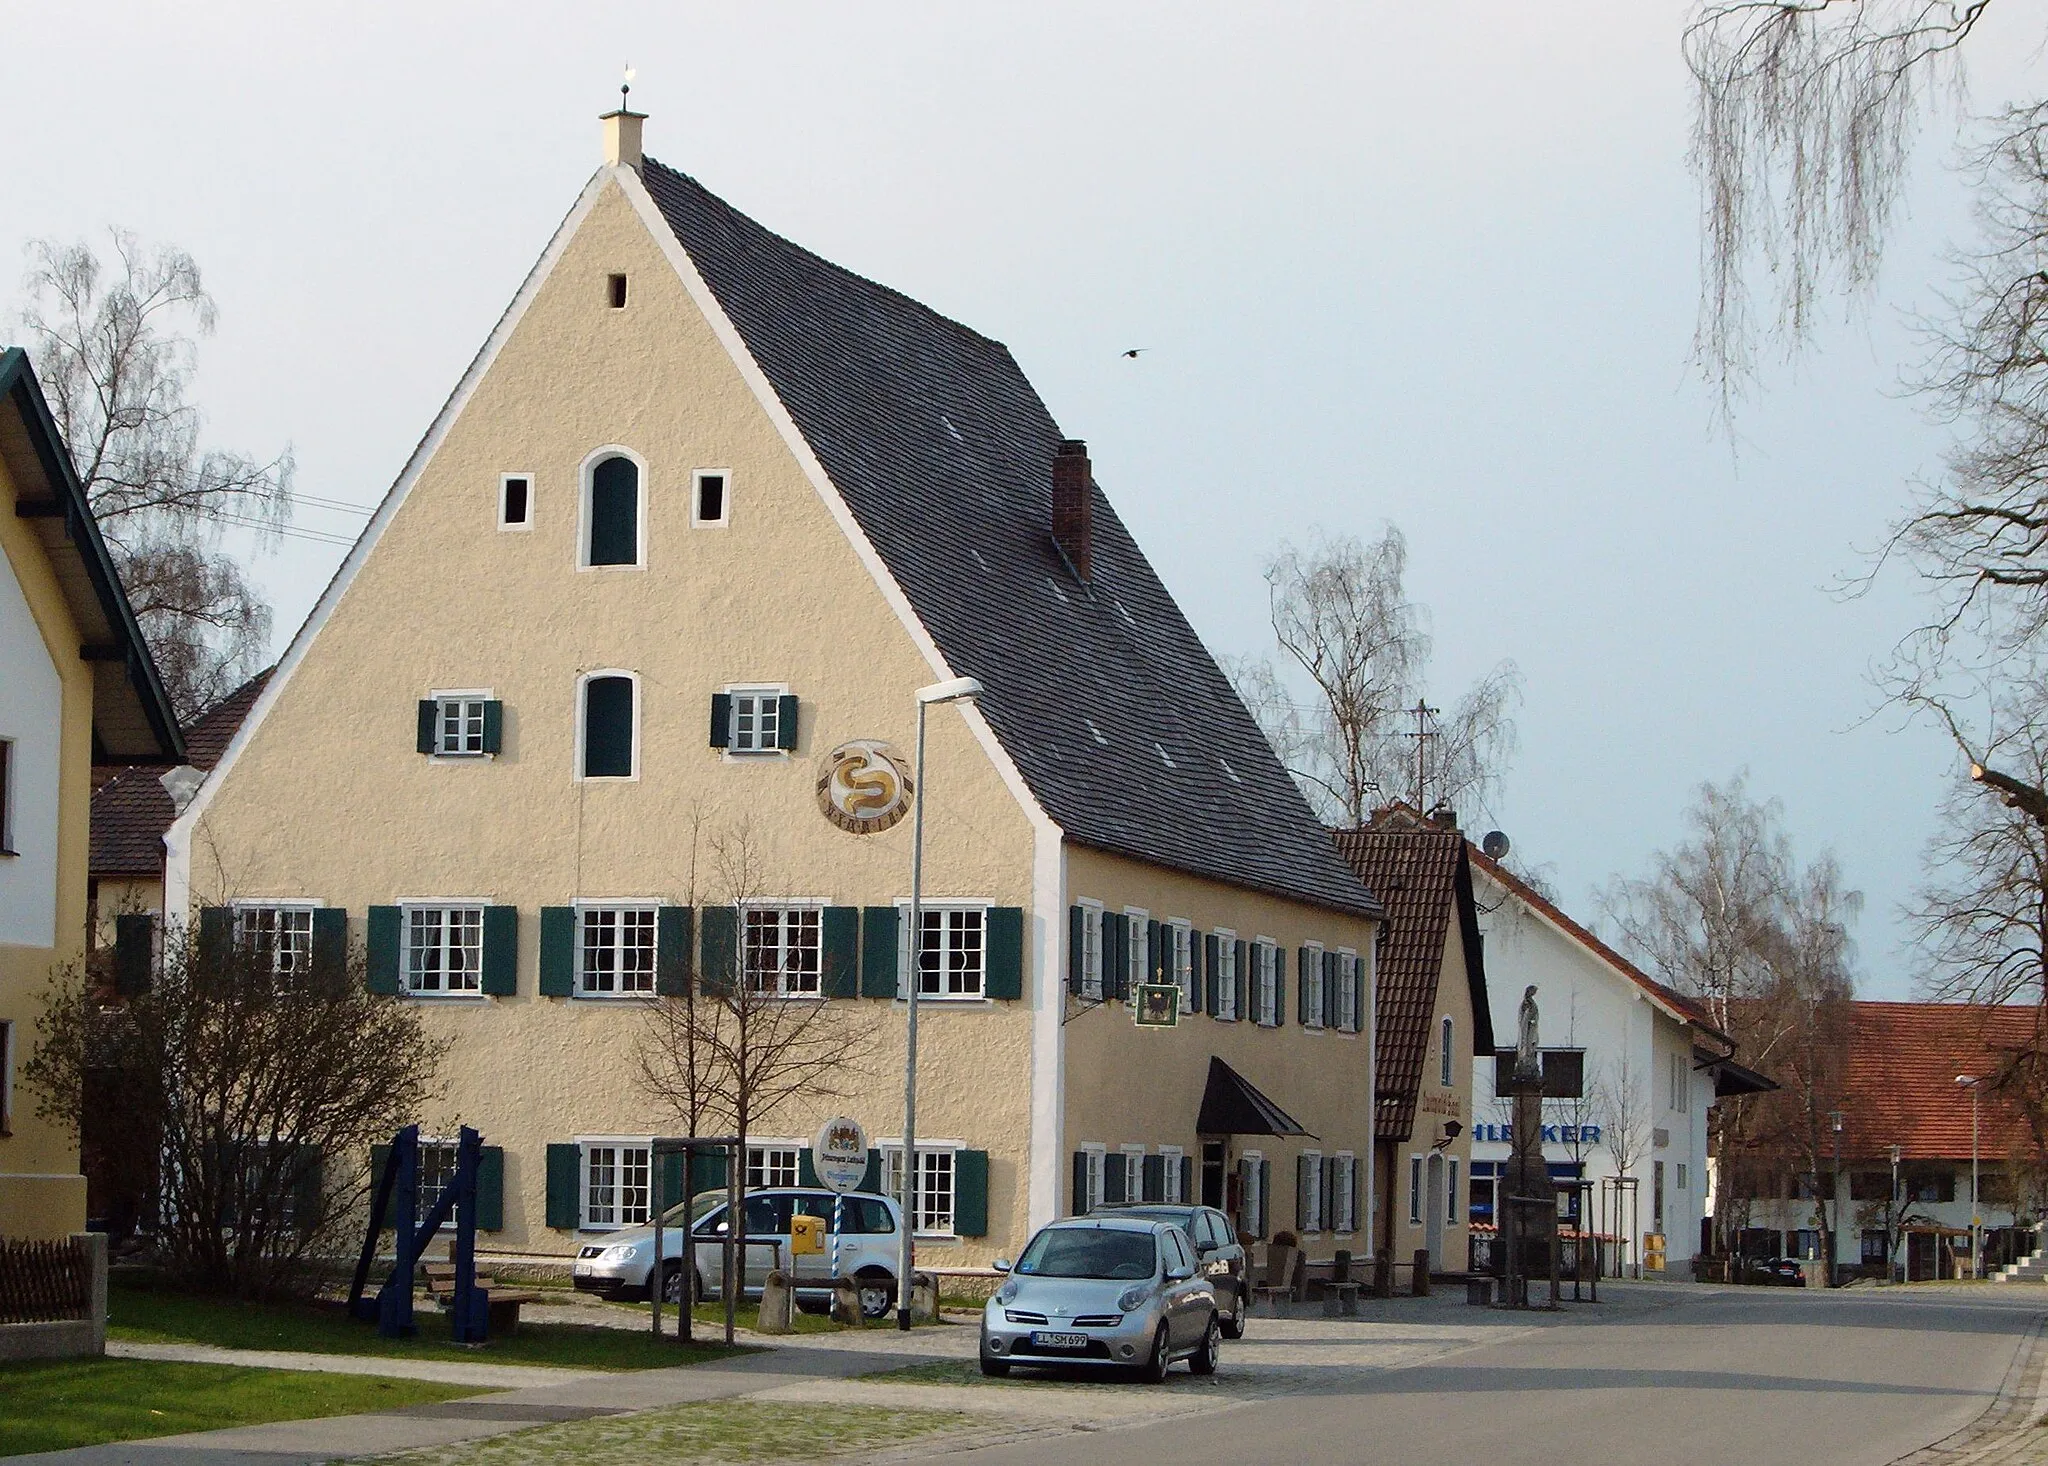 Photo showing: Leeder (Fuchstal), exterior view of Luitpold Inn, a former tavern dating back to the 2nd half of the 16th century.